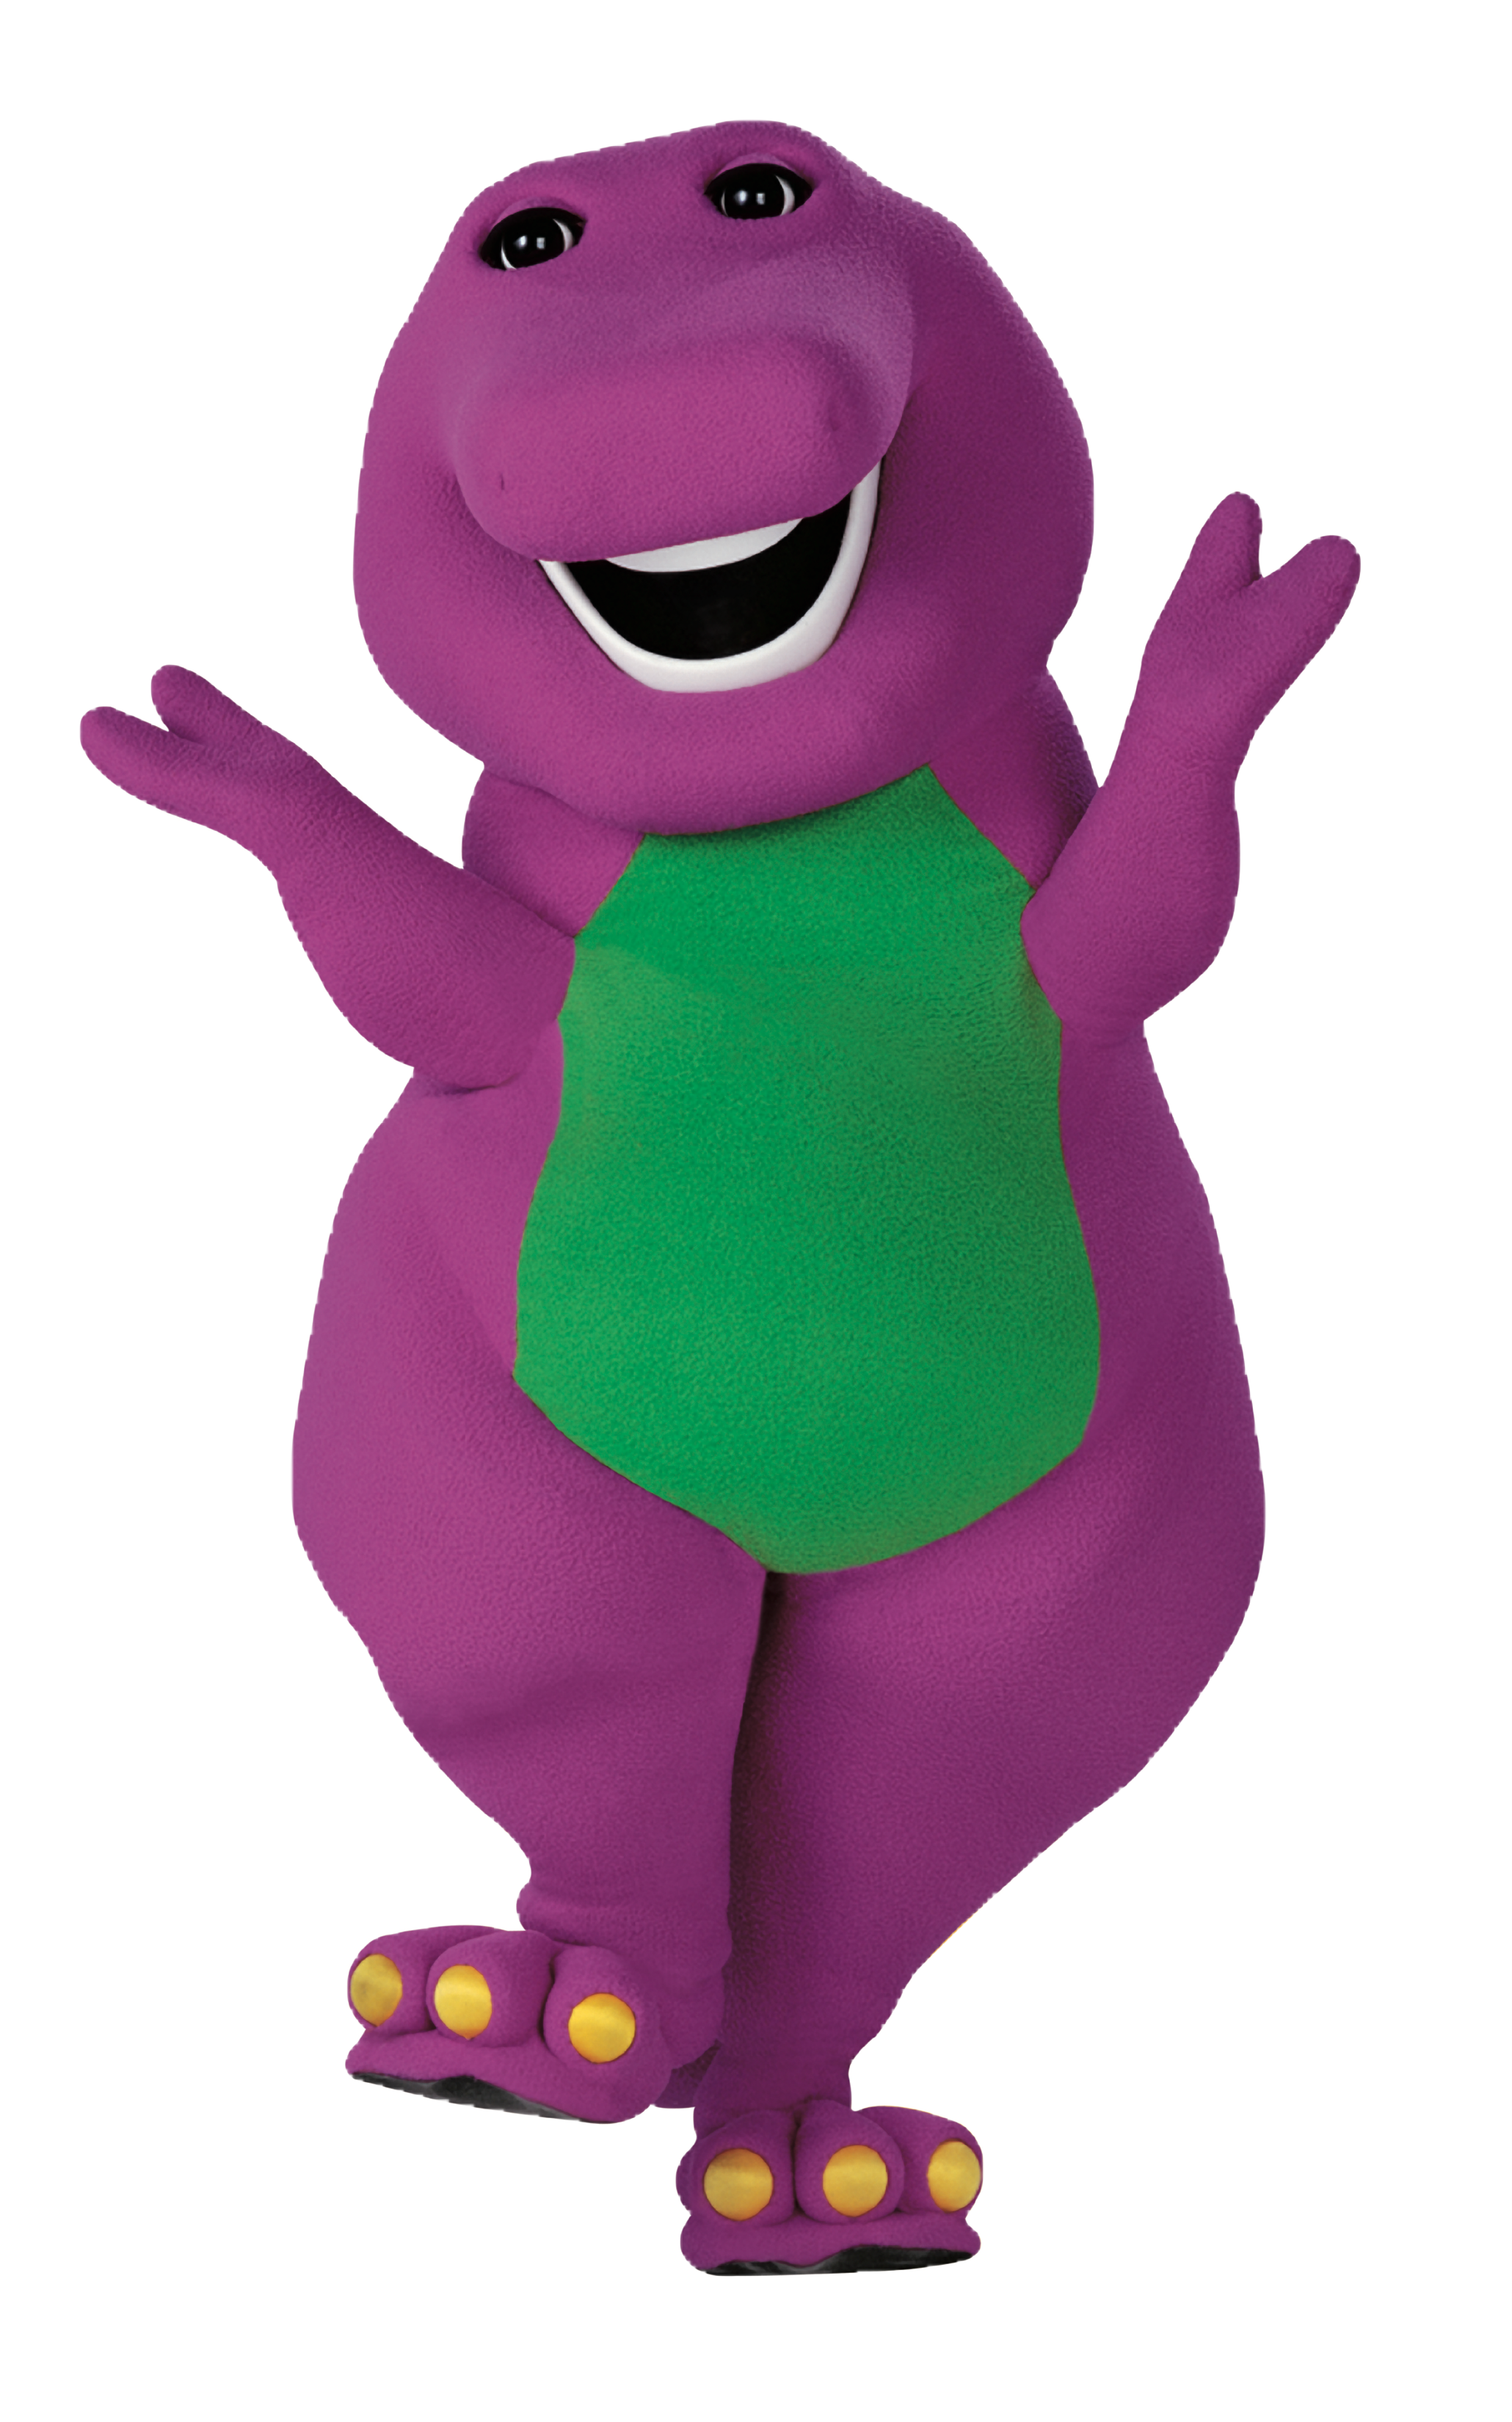 Popular and Trending barney Stickers on PicsArt